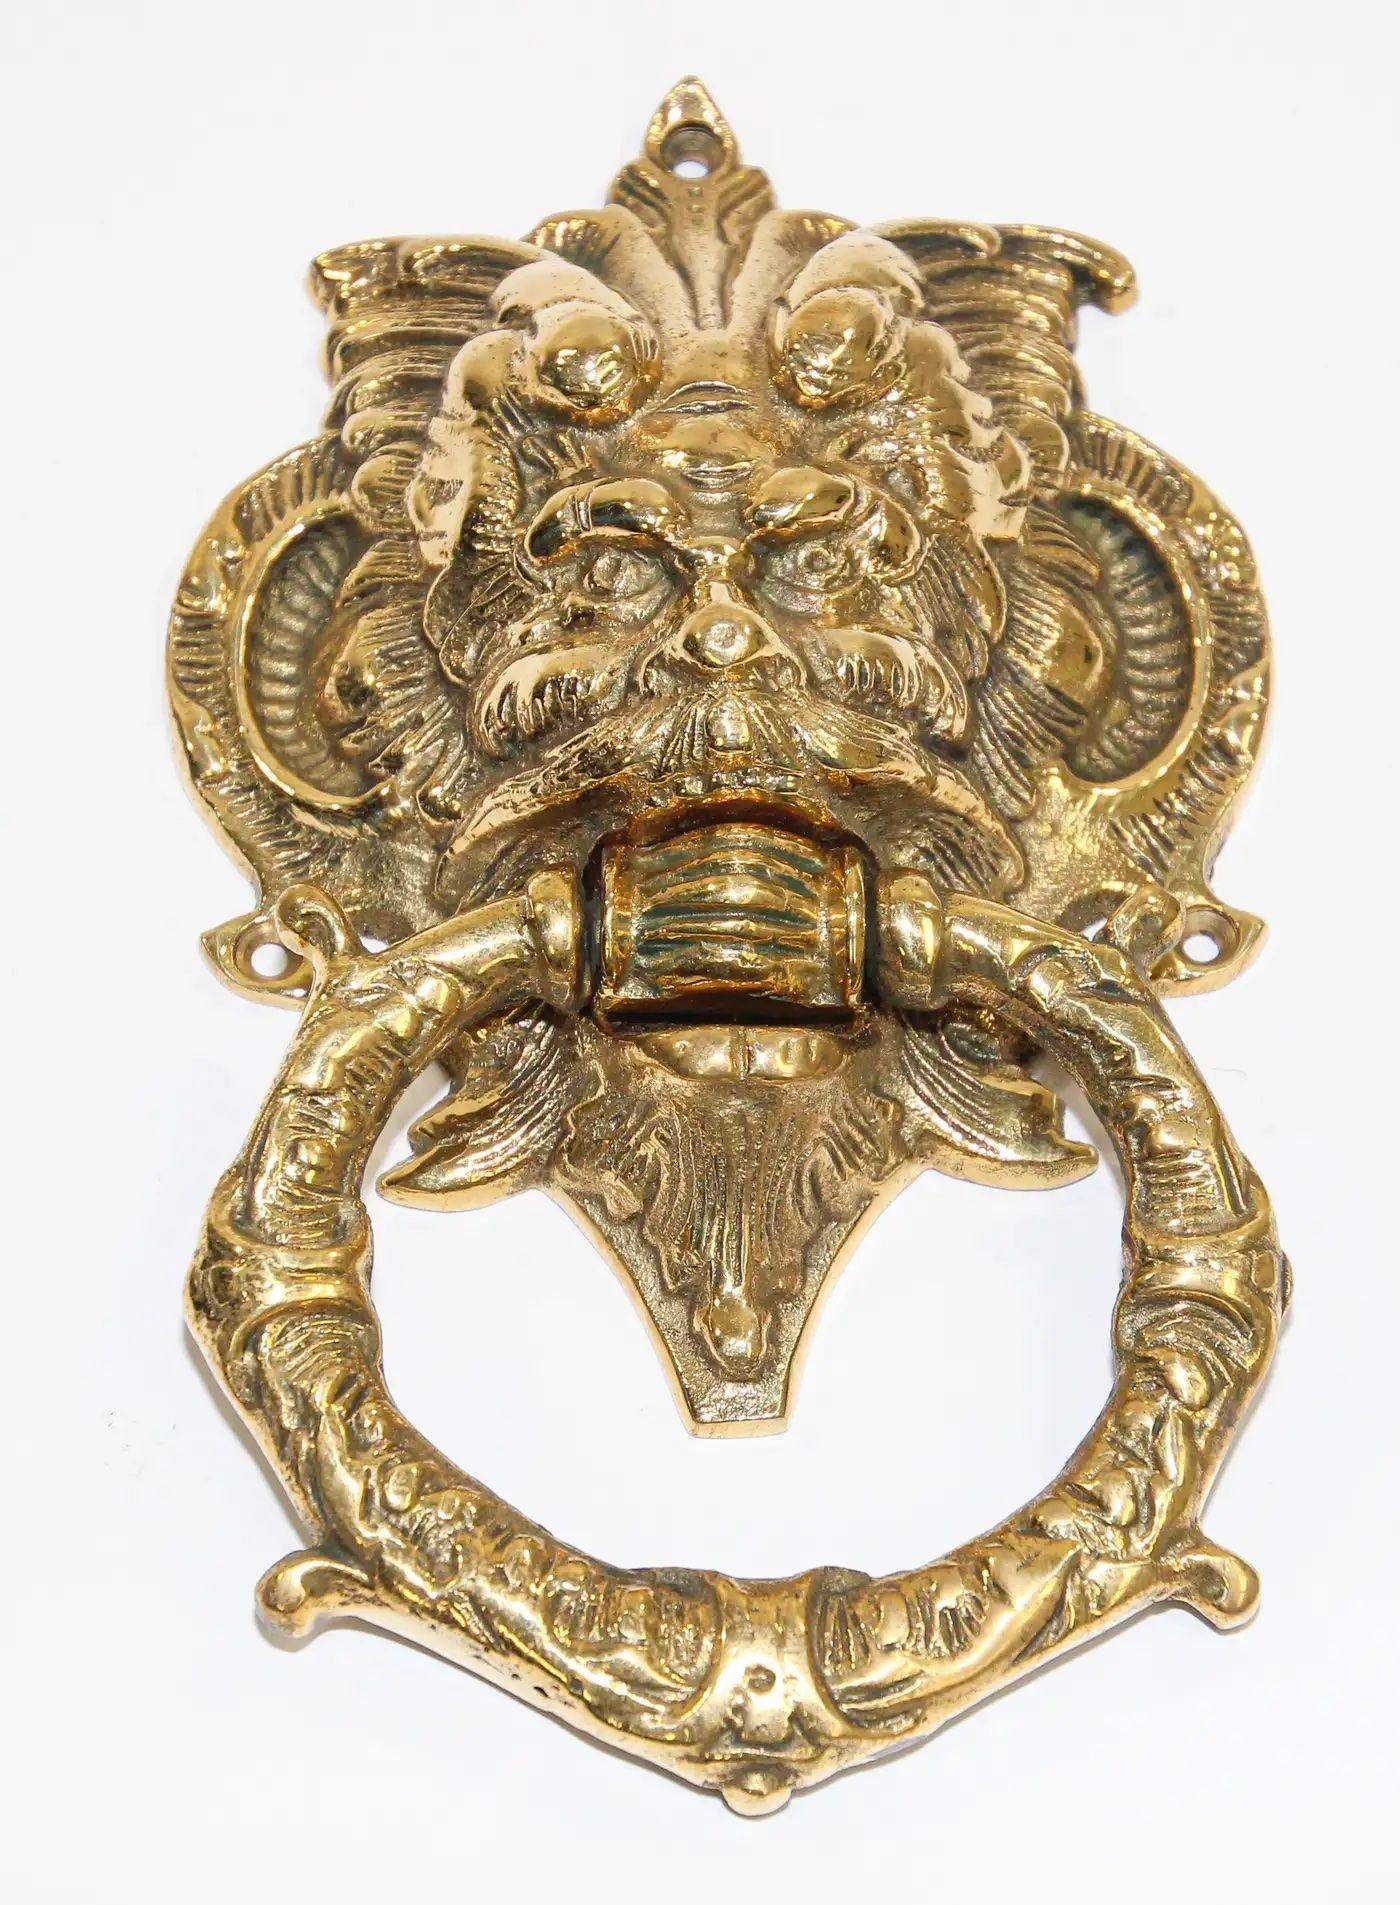 Vintage solid cast brass Italian door knocker with scary evil devil man face. The large mascaron crest has been crafted in grotesque style and is sometimes called a chimera. A mascaron is an architectural ornamentation, typically a face, that is